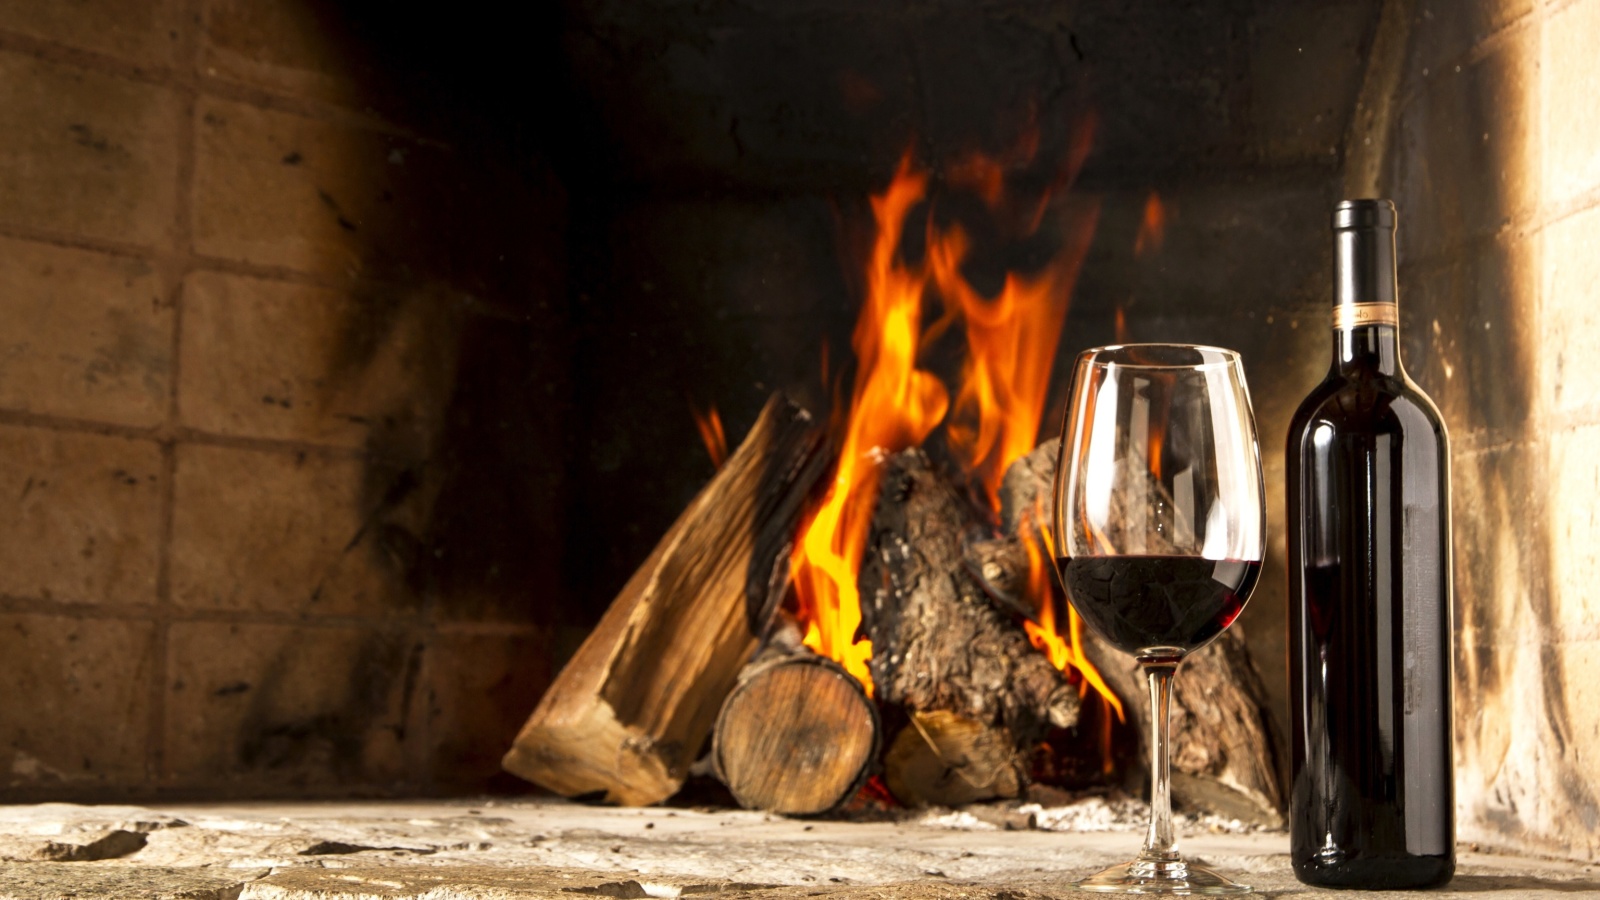 Wine and fireplace wallpaper 1600x900